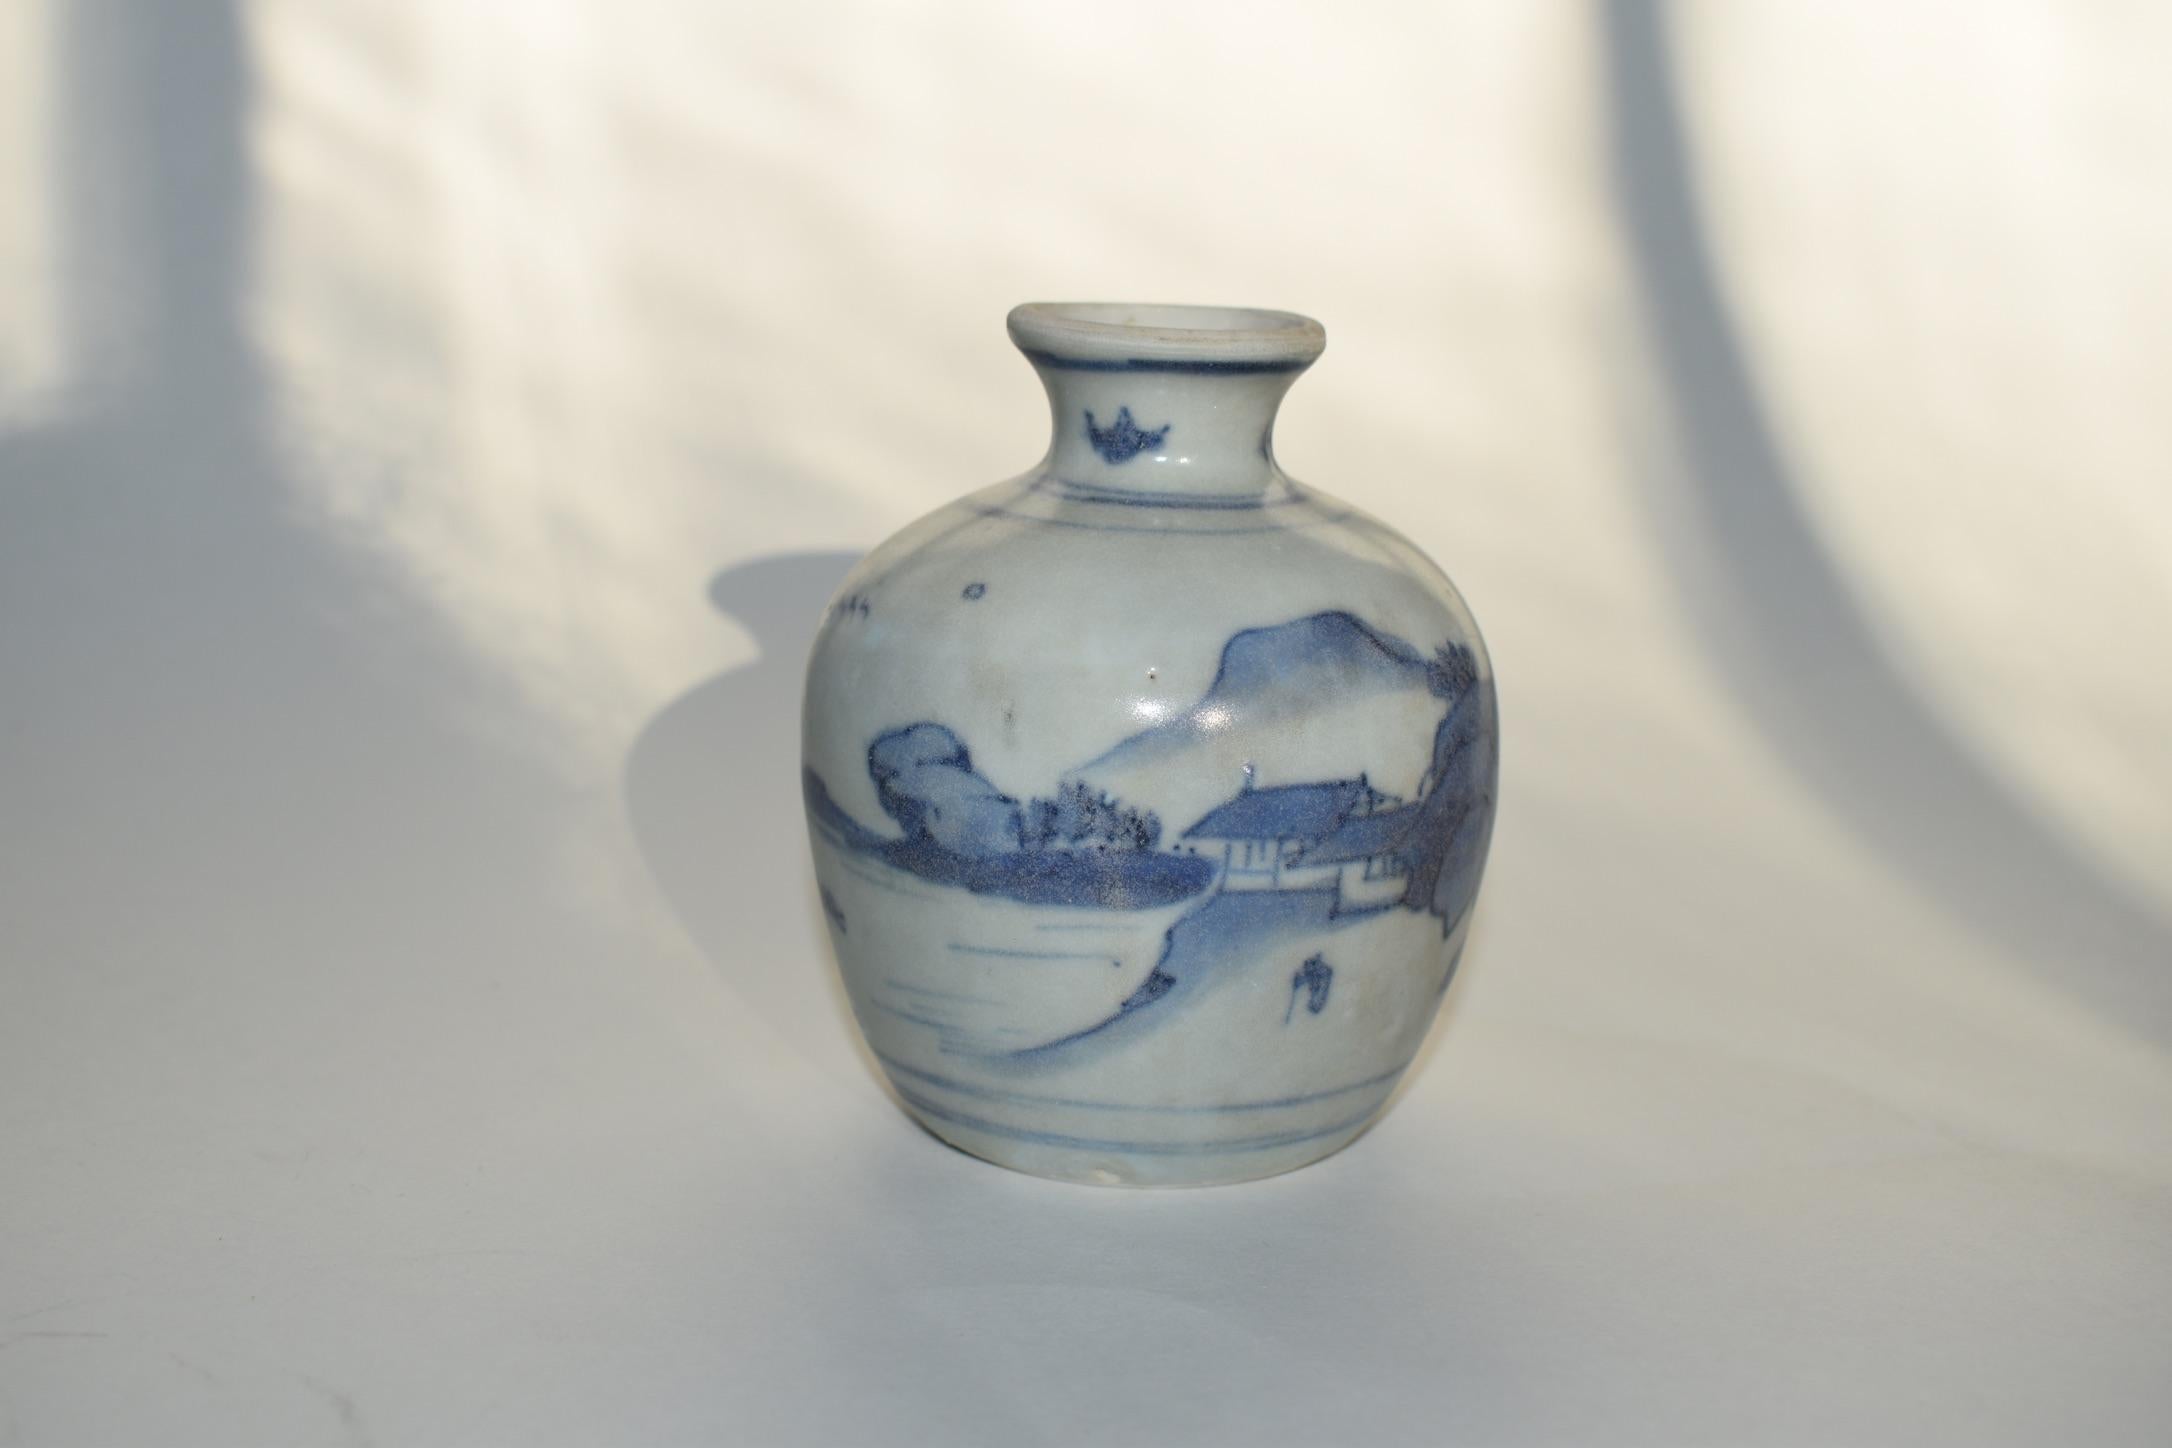 Pair of small 17th century blue and white porcelain jars from the Hatcher collection. 
These jars were part of a hoard recovered by Captain Michael Hatcher from the wreck of a ship that sunk in the South China Sea in 1643. Approximately 25,000